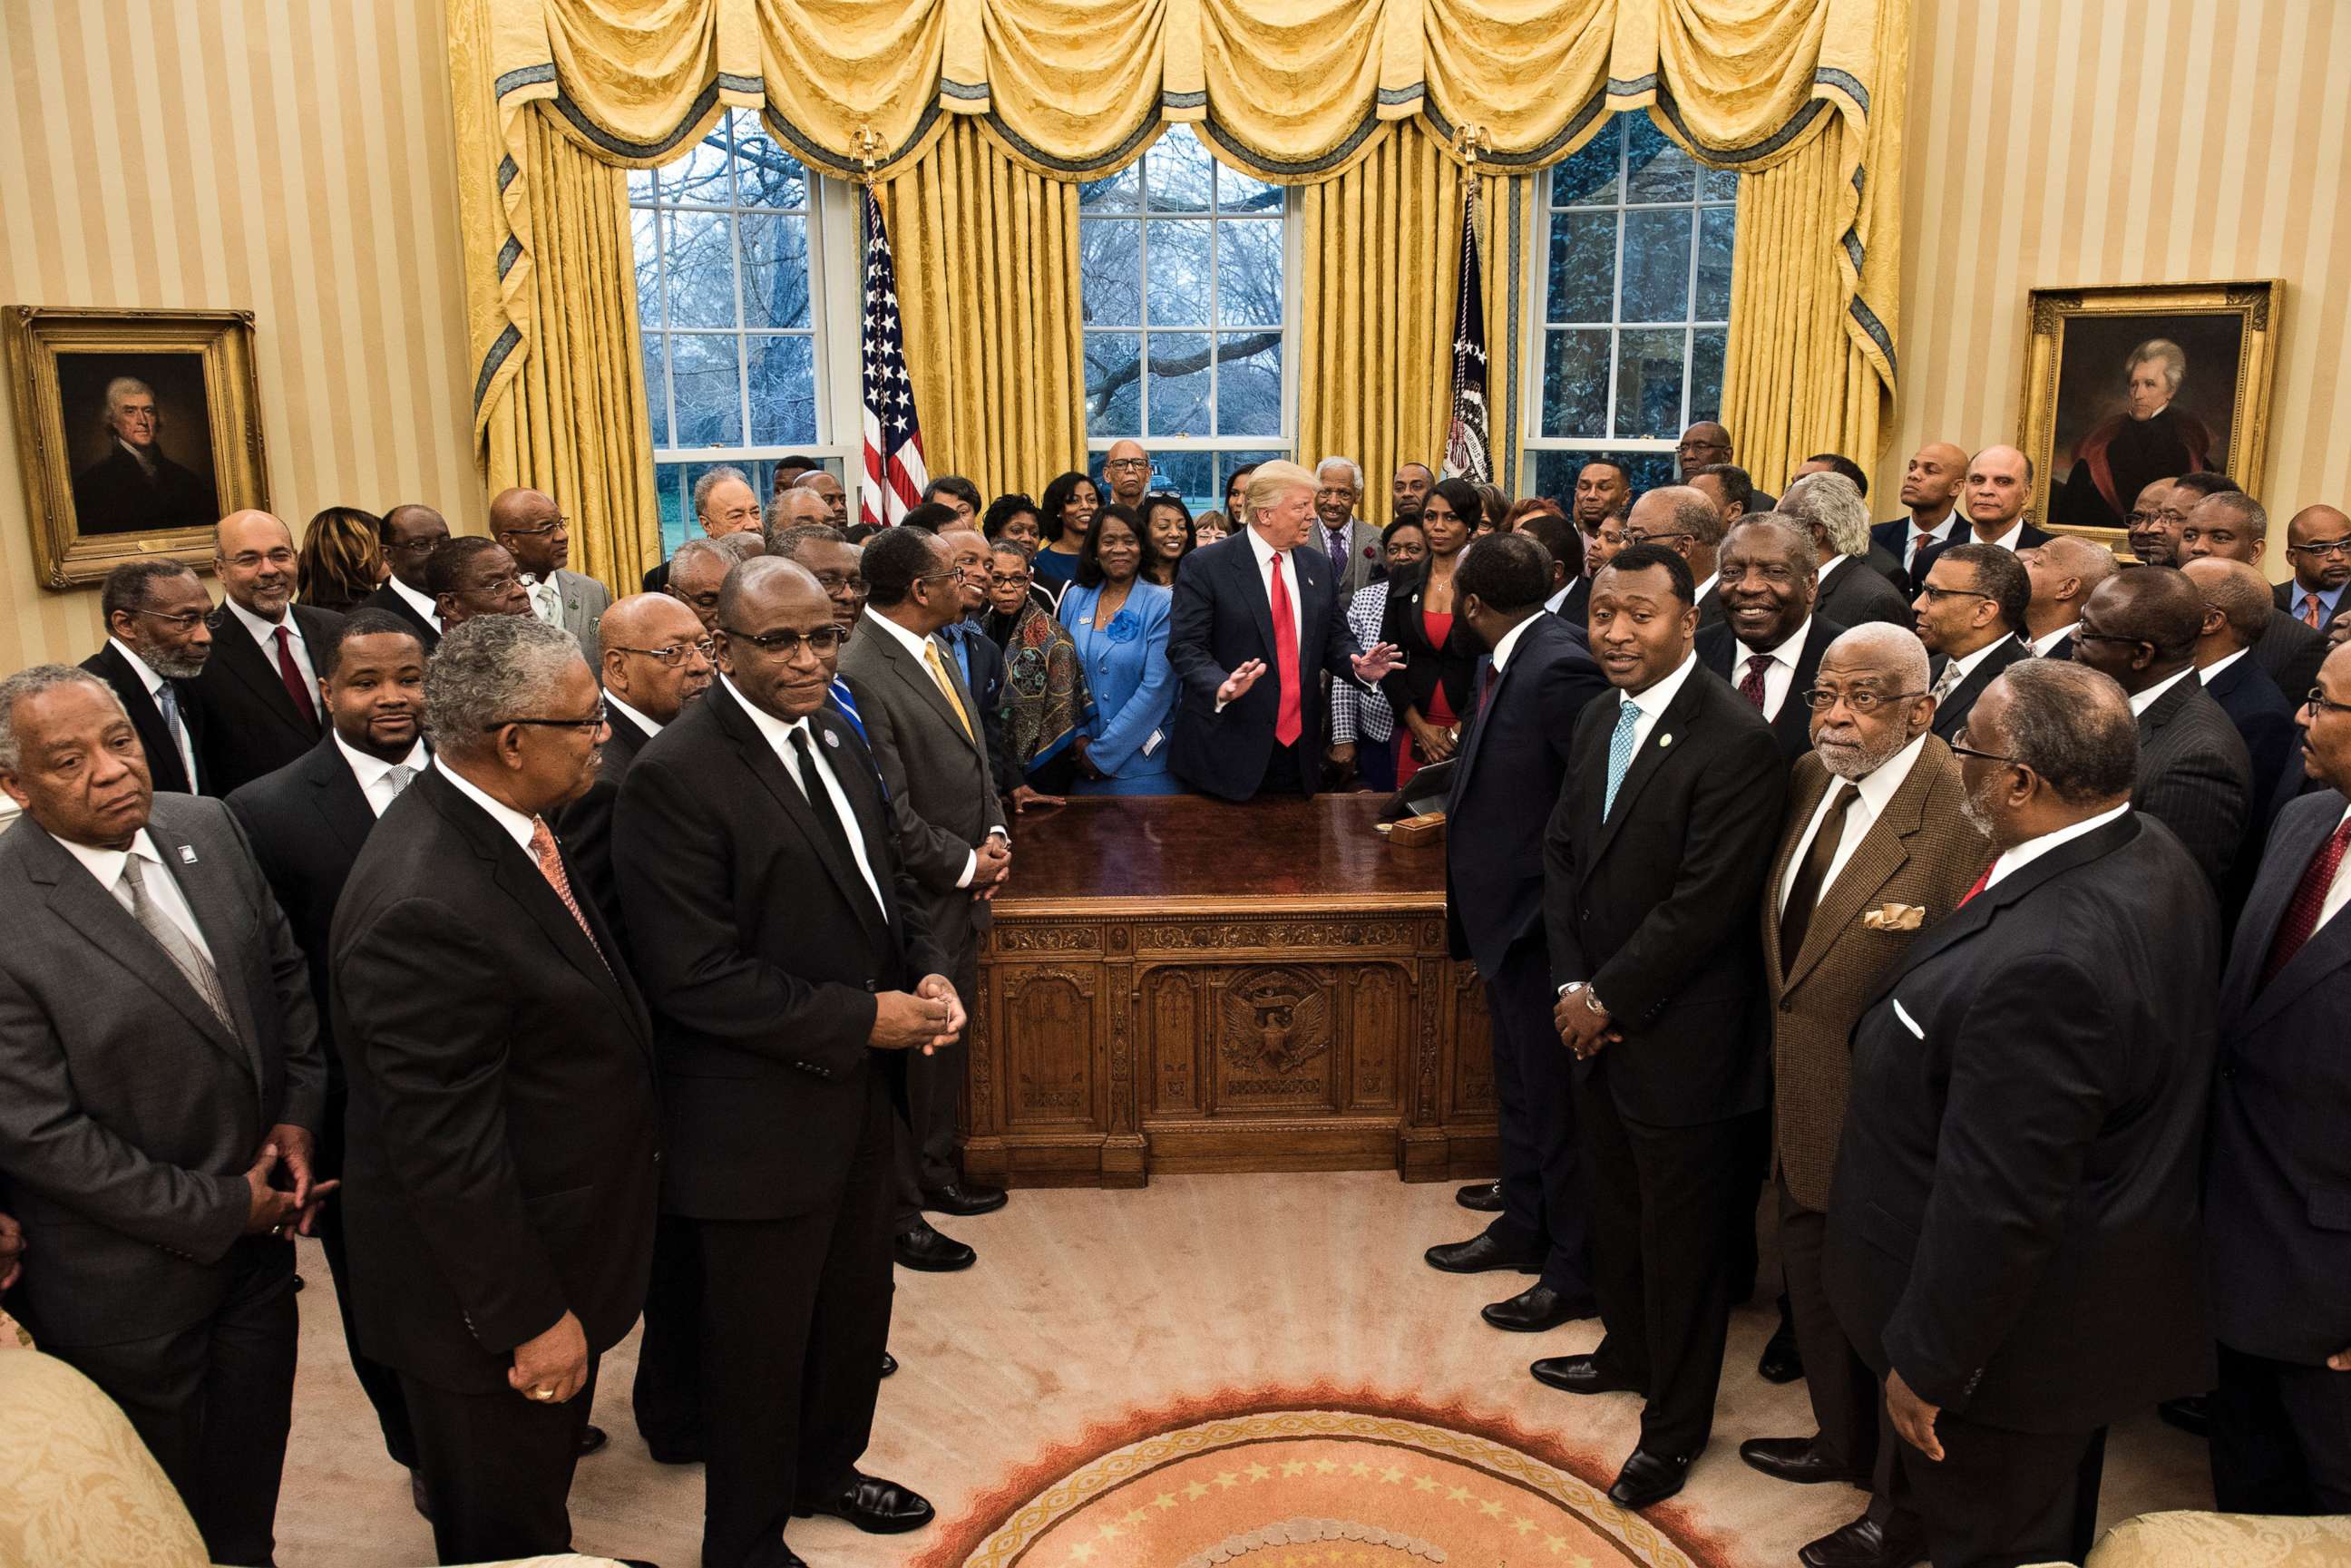 PHOTO: Omarosa Manigault (center R), President Donald Trump and leaders of historically black universities and colleges wait for a group photo in the Oval Office of the White House in Washington, D.C., Feb. 27, 2017.